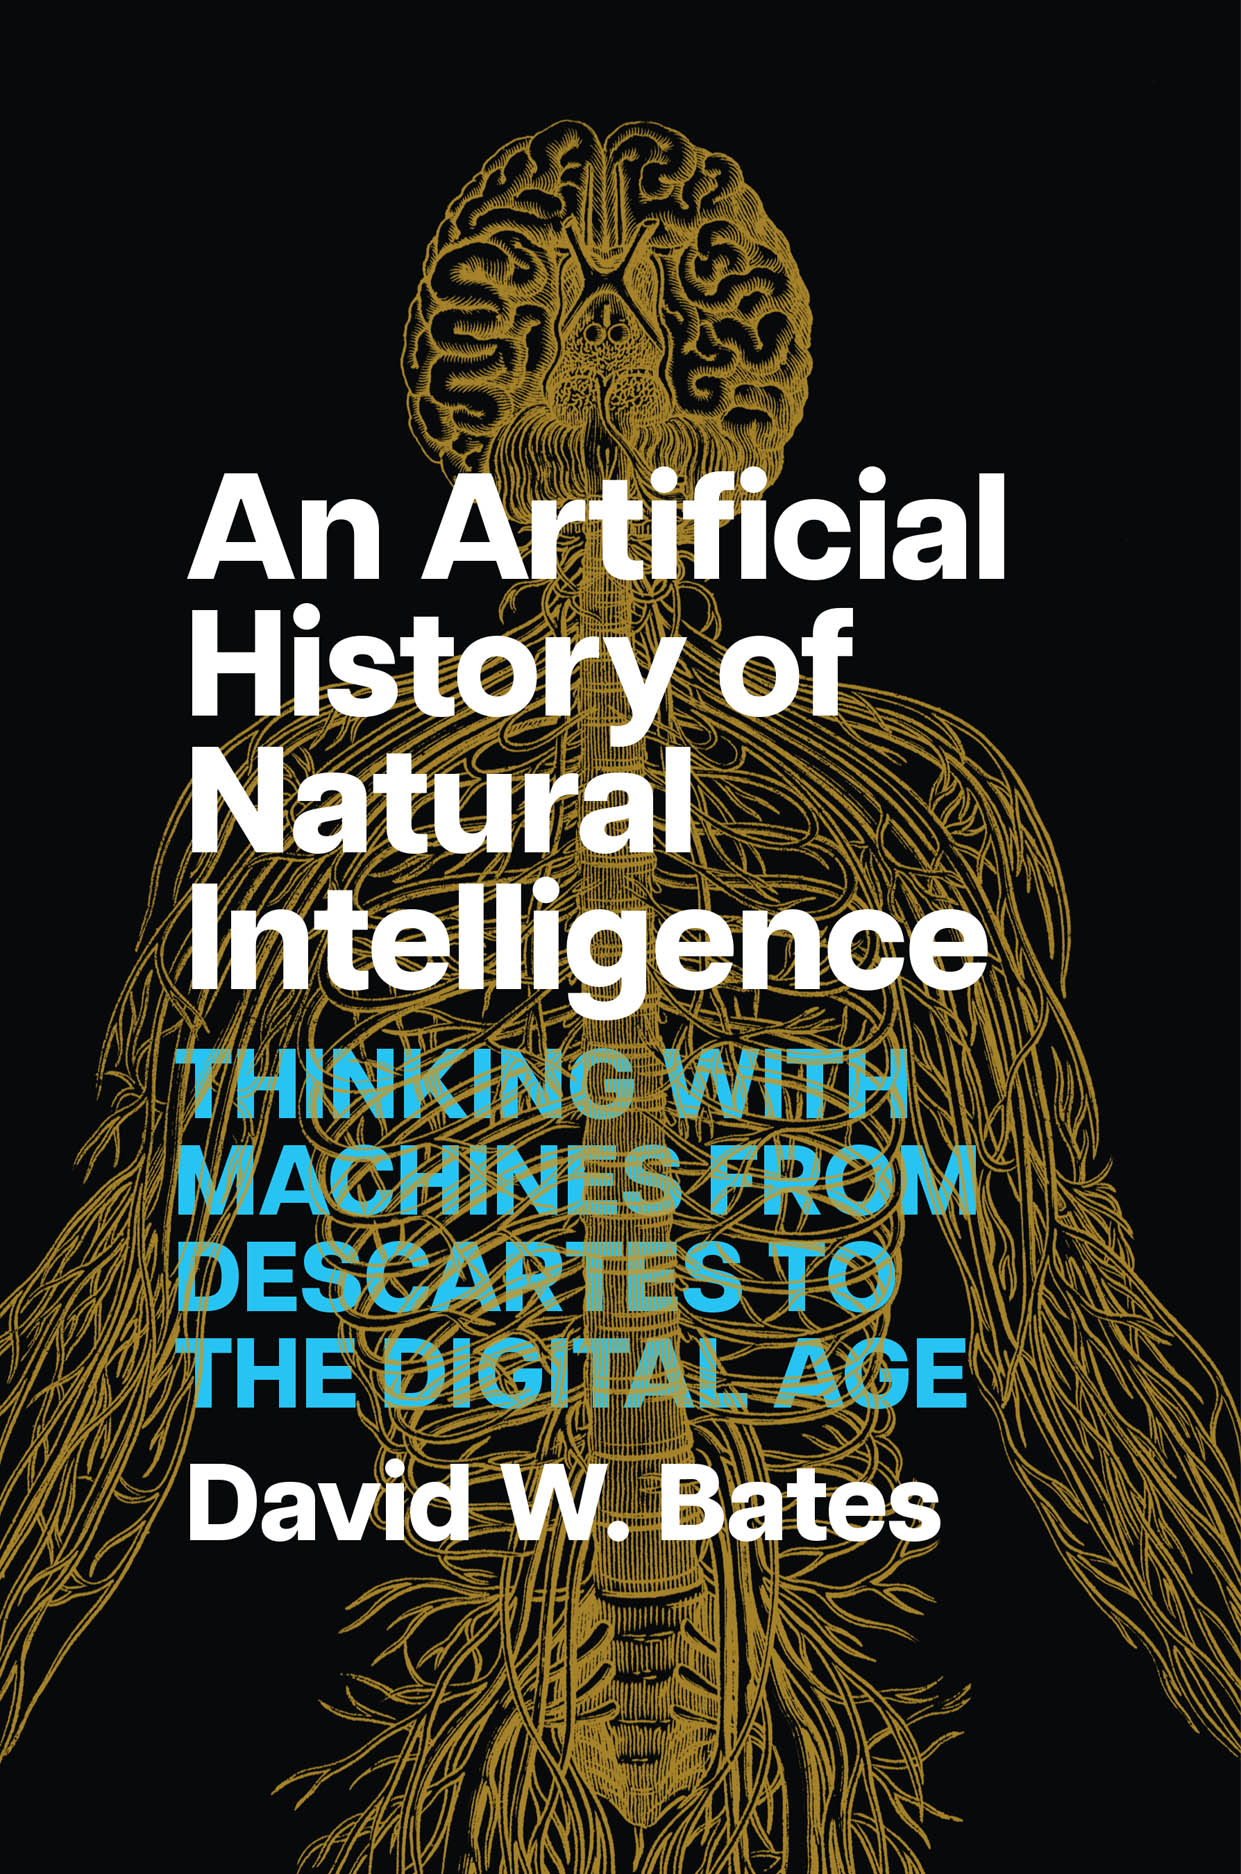 Read an Excerpt from “An Artificial History of Natural Intelligence” by David W. Bates